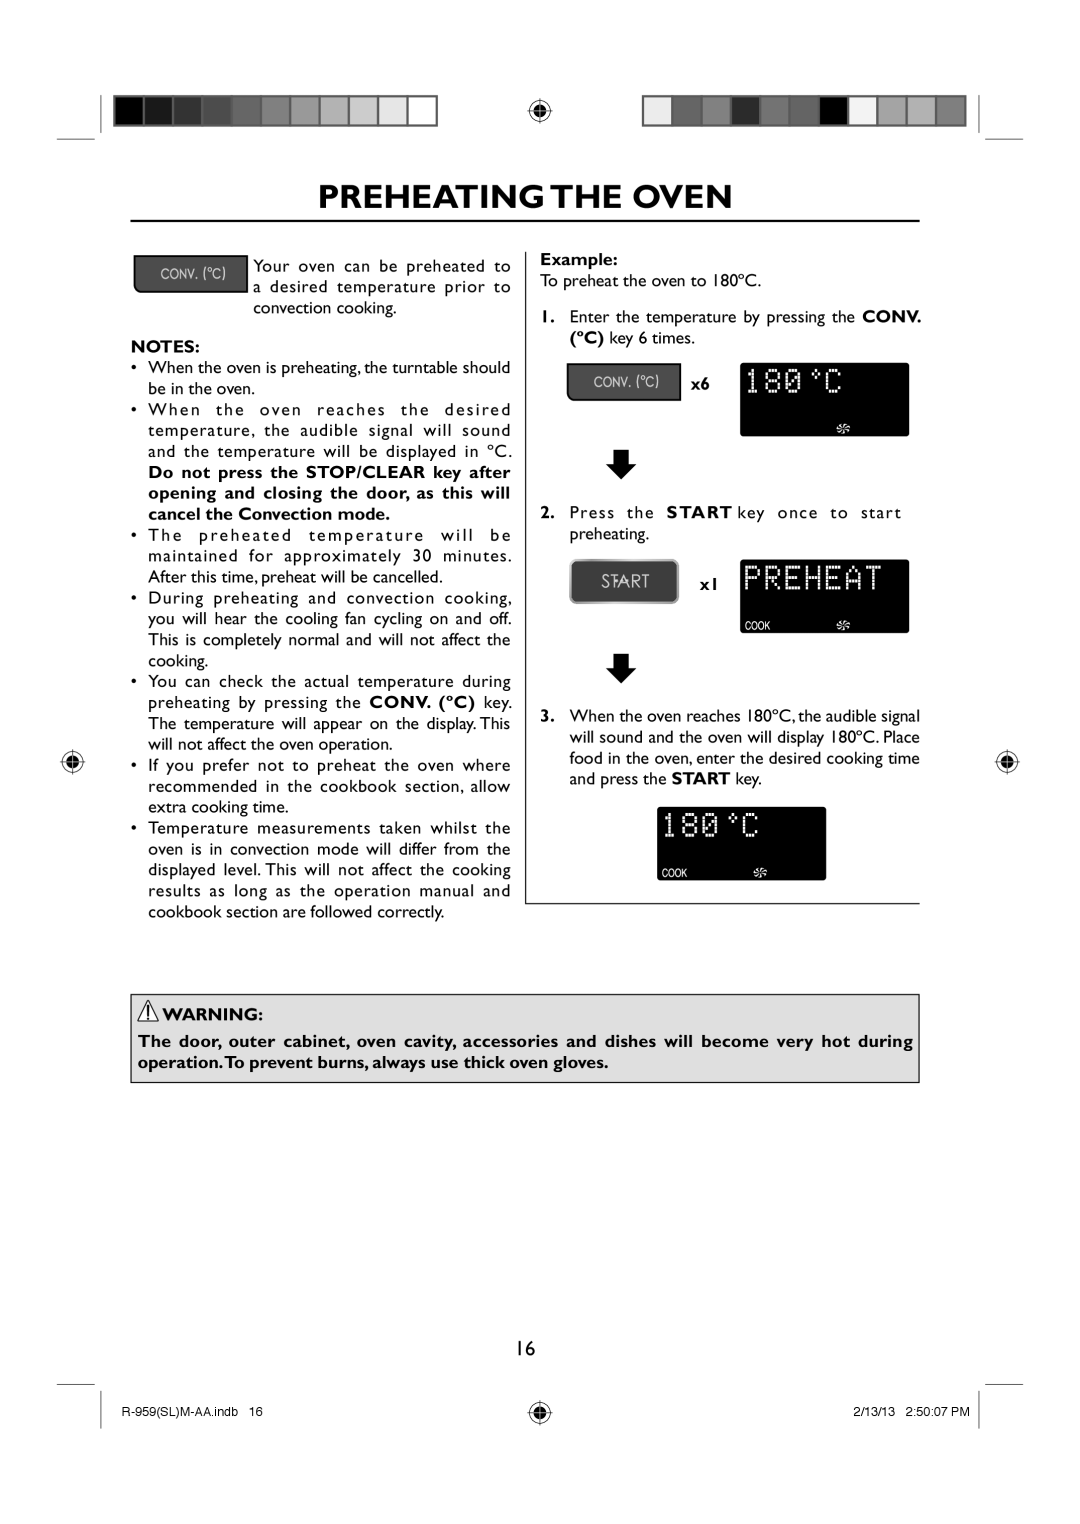 Sharp R-959(SL)M-AA manual Preheating The Oven, Example 